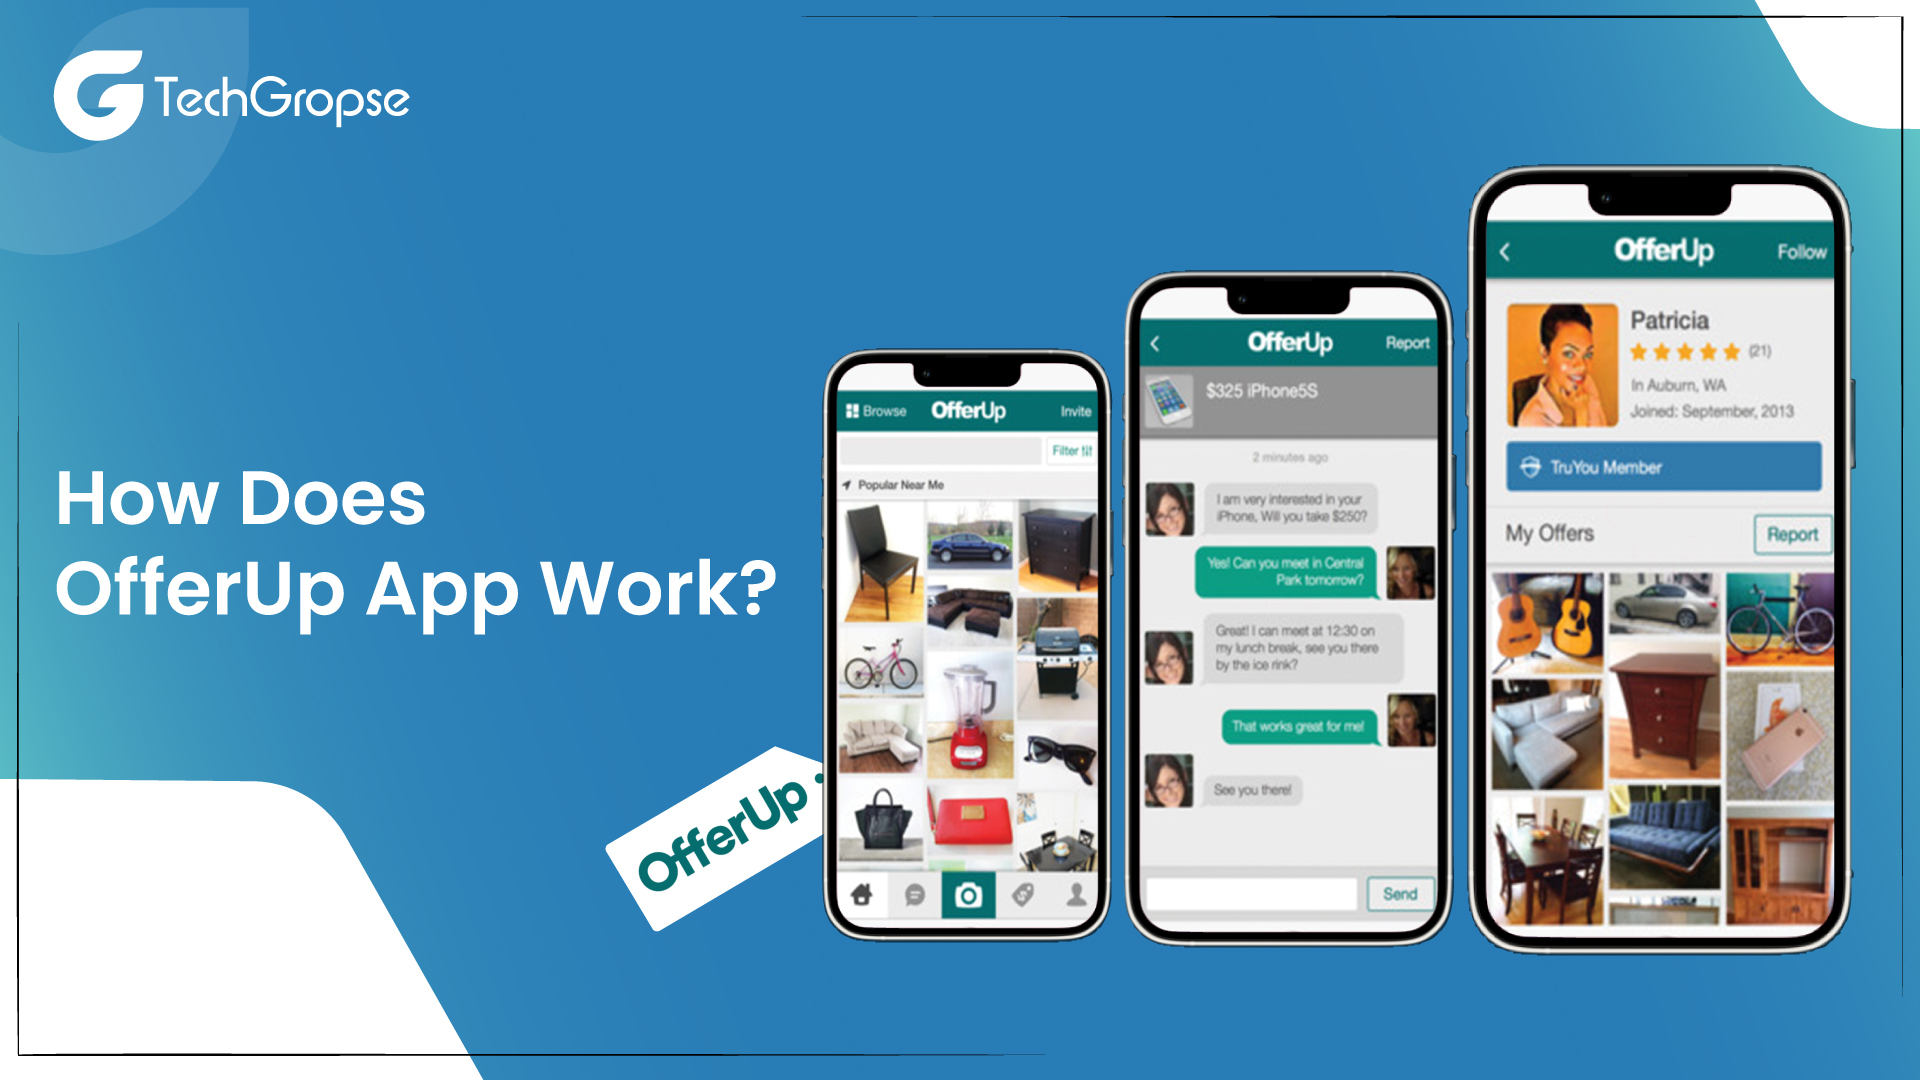 How Does OfferUp App Work?